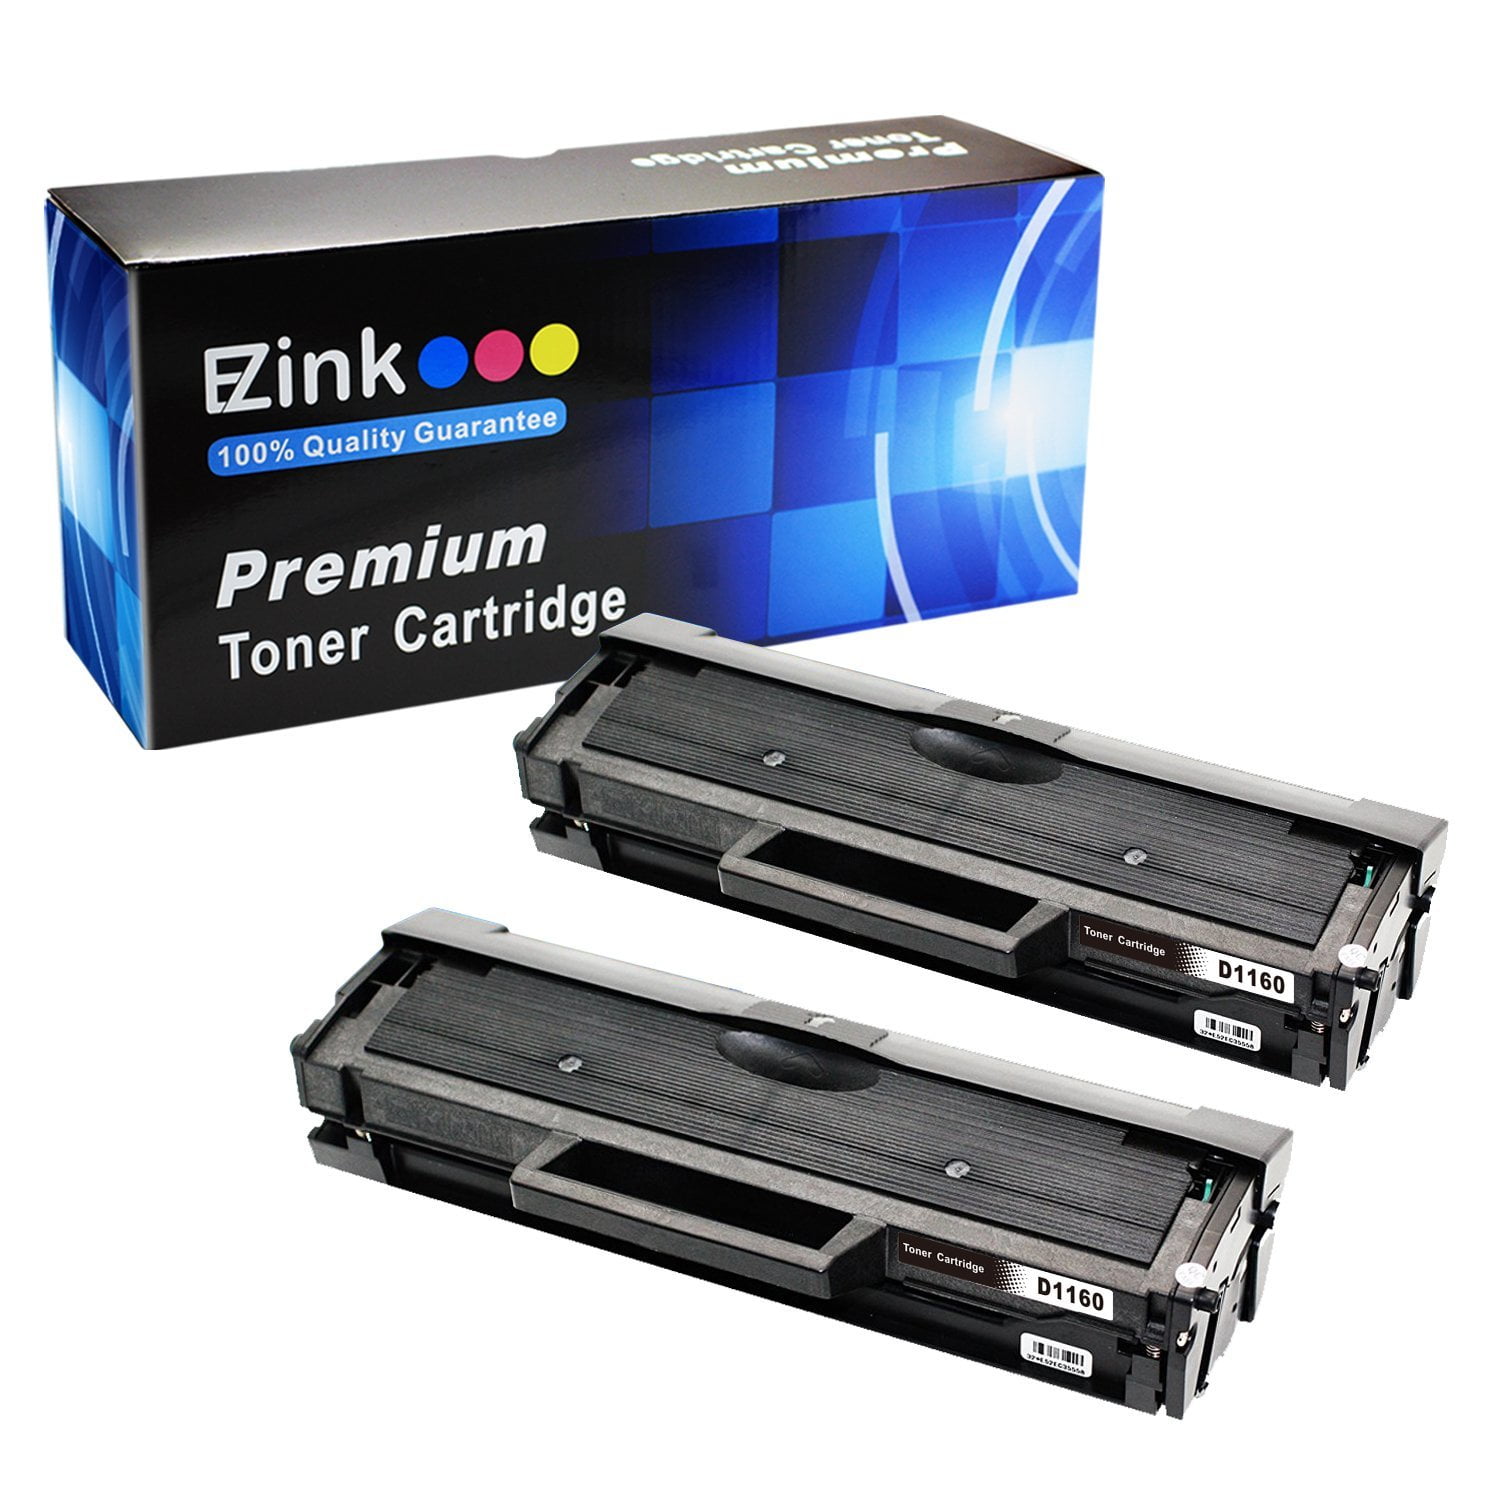 E-Z Ink Compatible Toner Cartridge Replacement for Dell YK1PM 1160 B1160  331-7335 HF44N HF442 (2 Black) for use with Dell B1160 B1160w B1163w  B1165nfw Laser Printer 